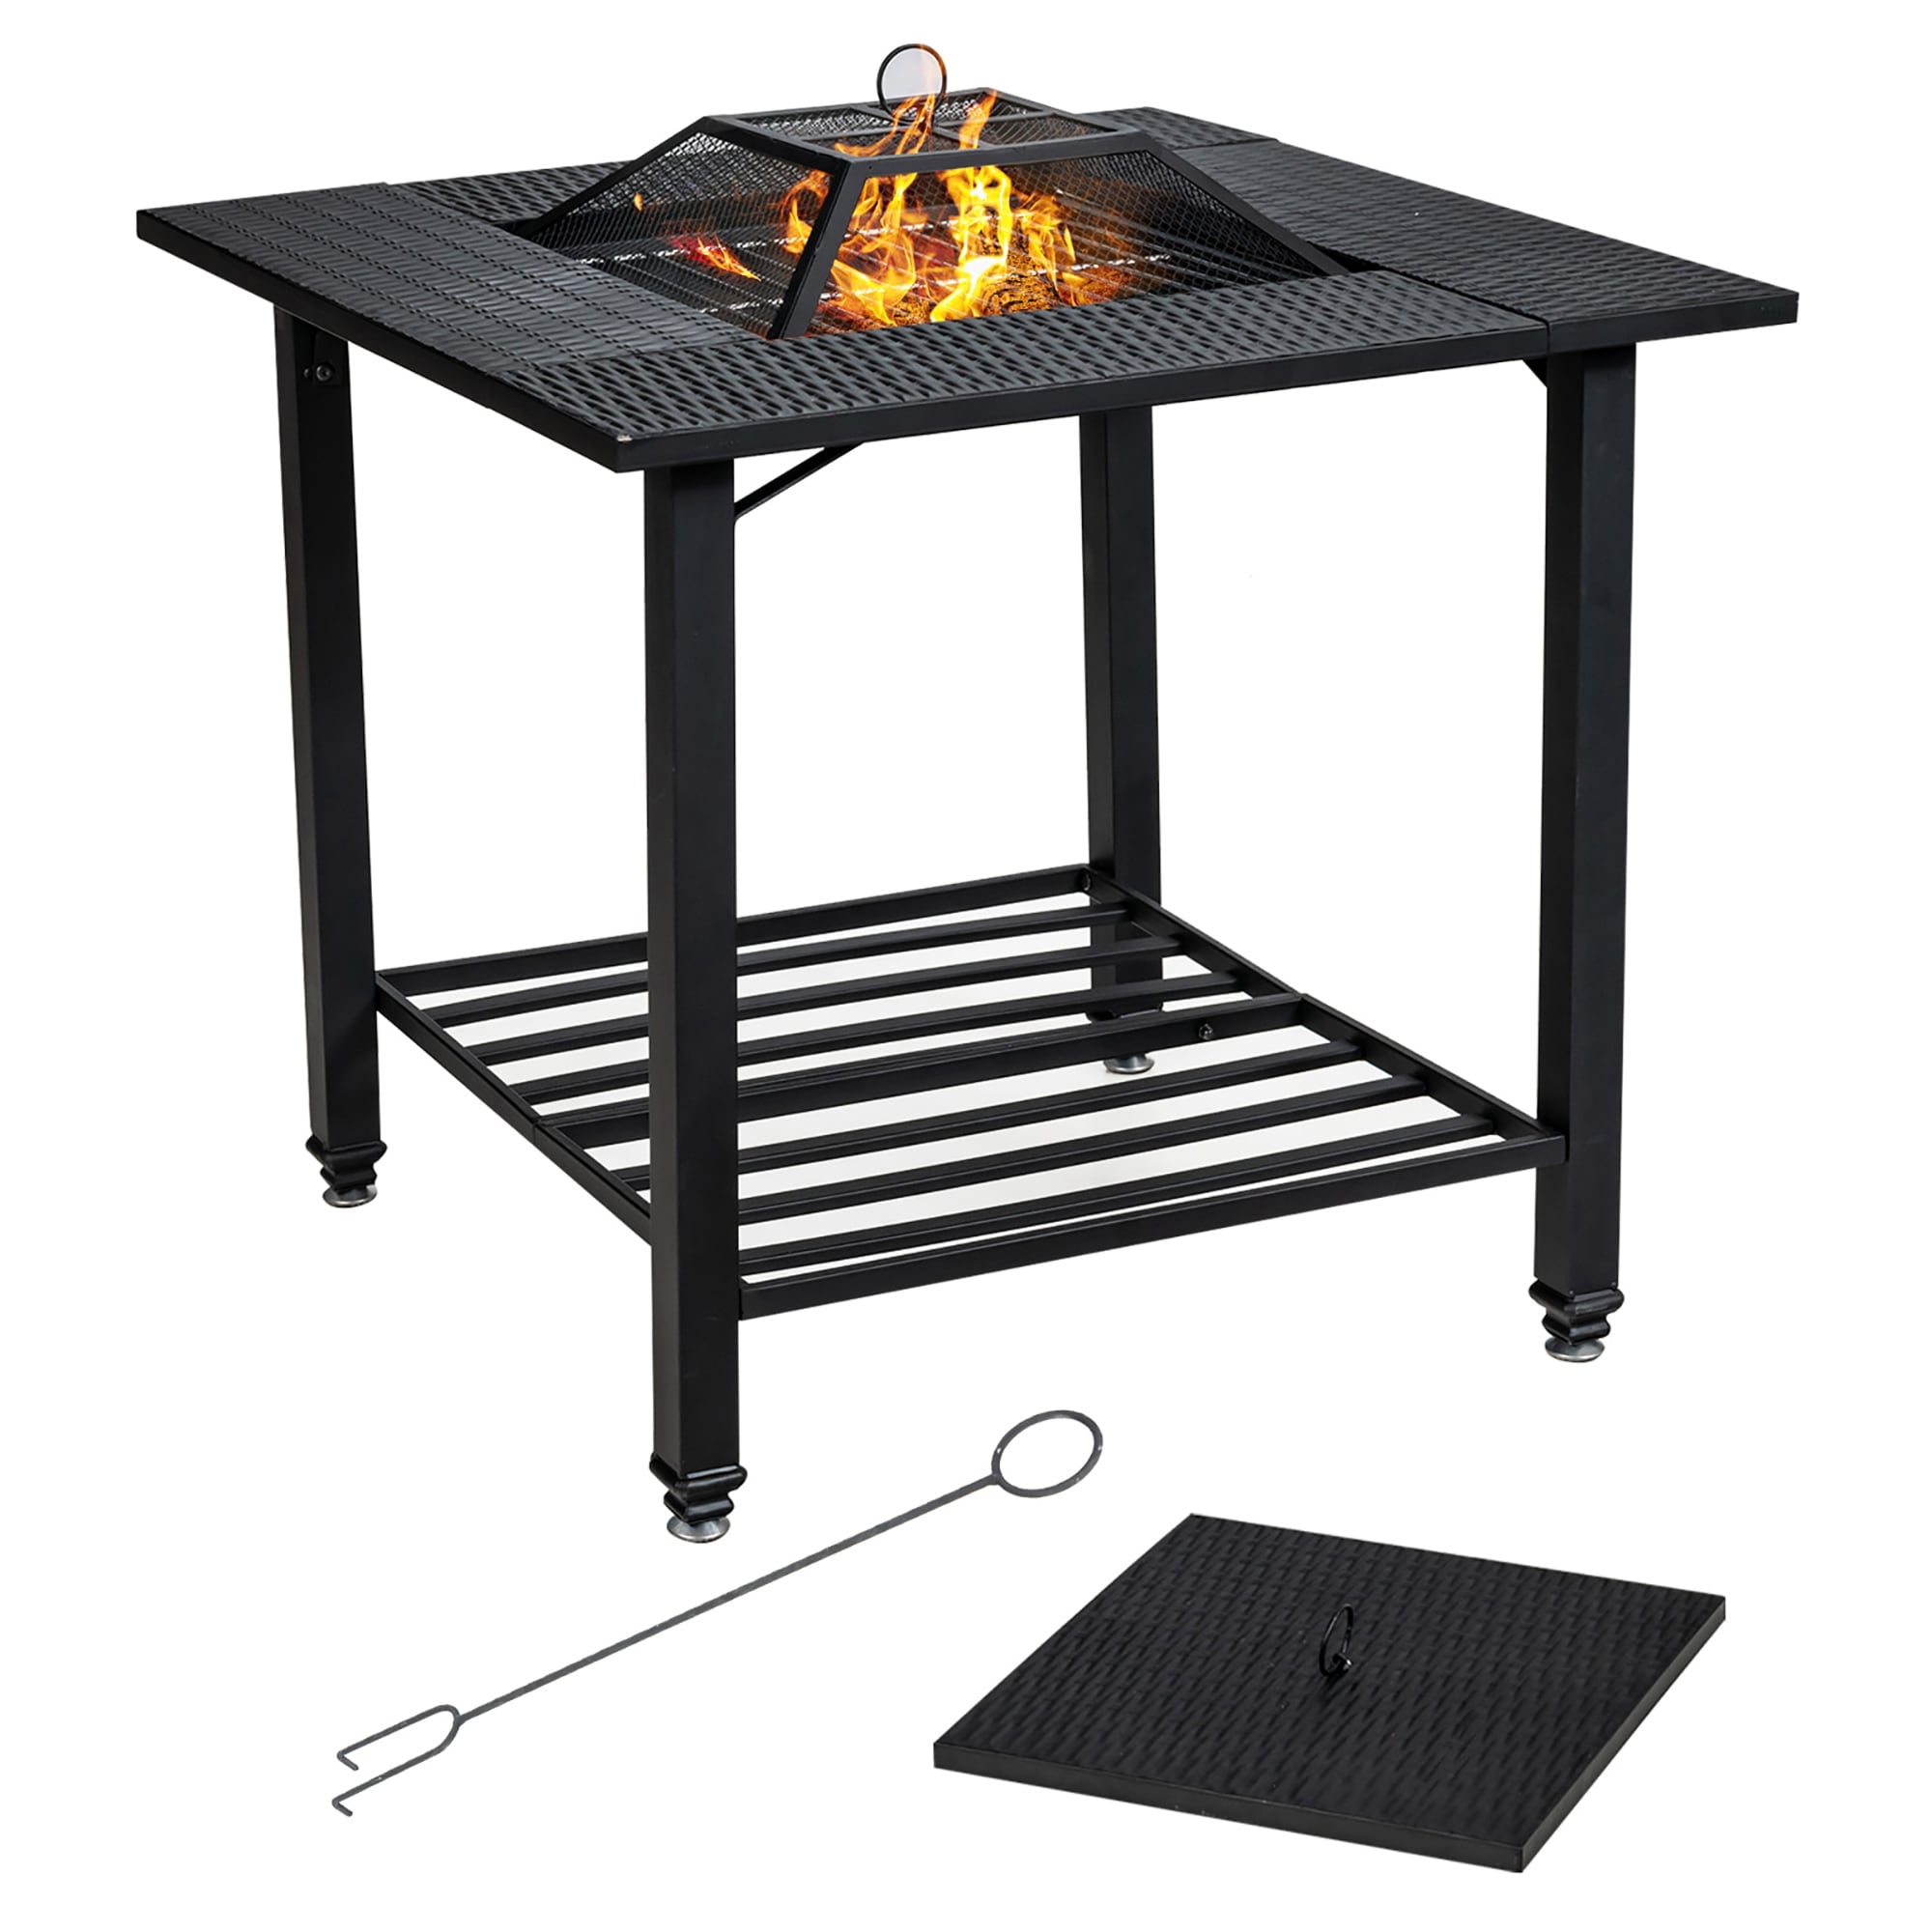 31 Outdoor Fire Pit Dining Table Wood Burning W/ Cooking BBQ Grate